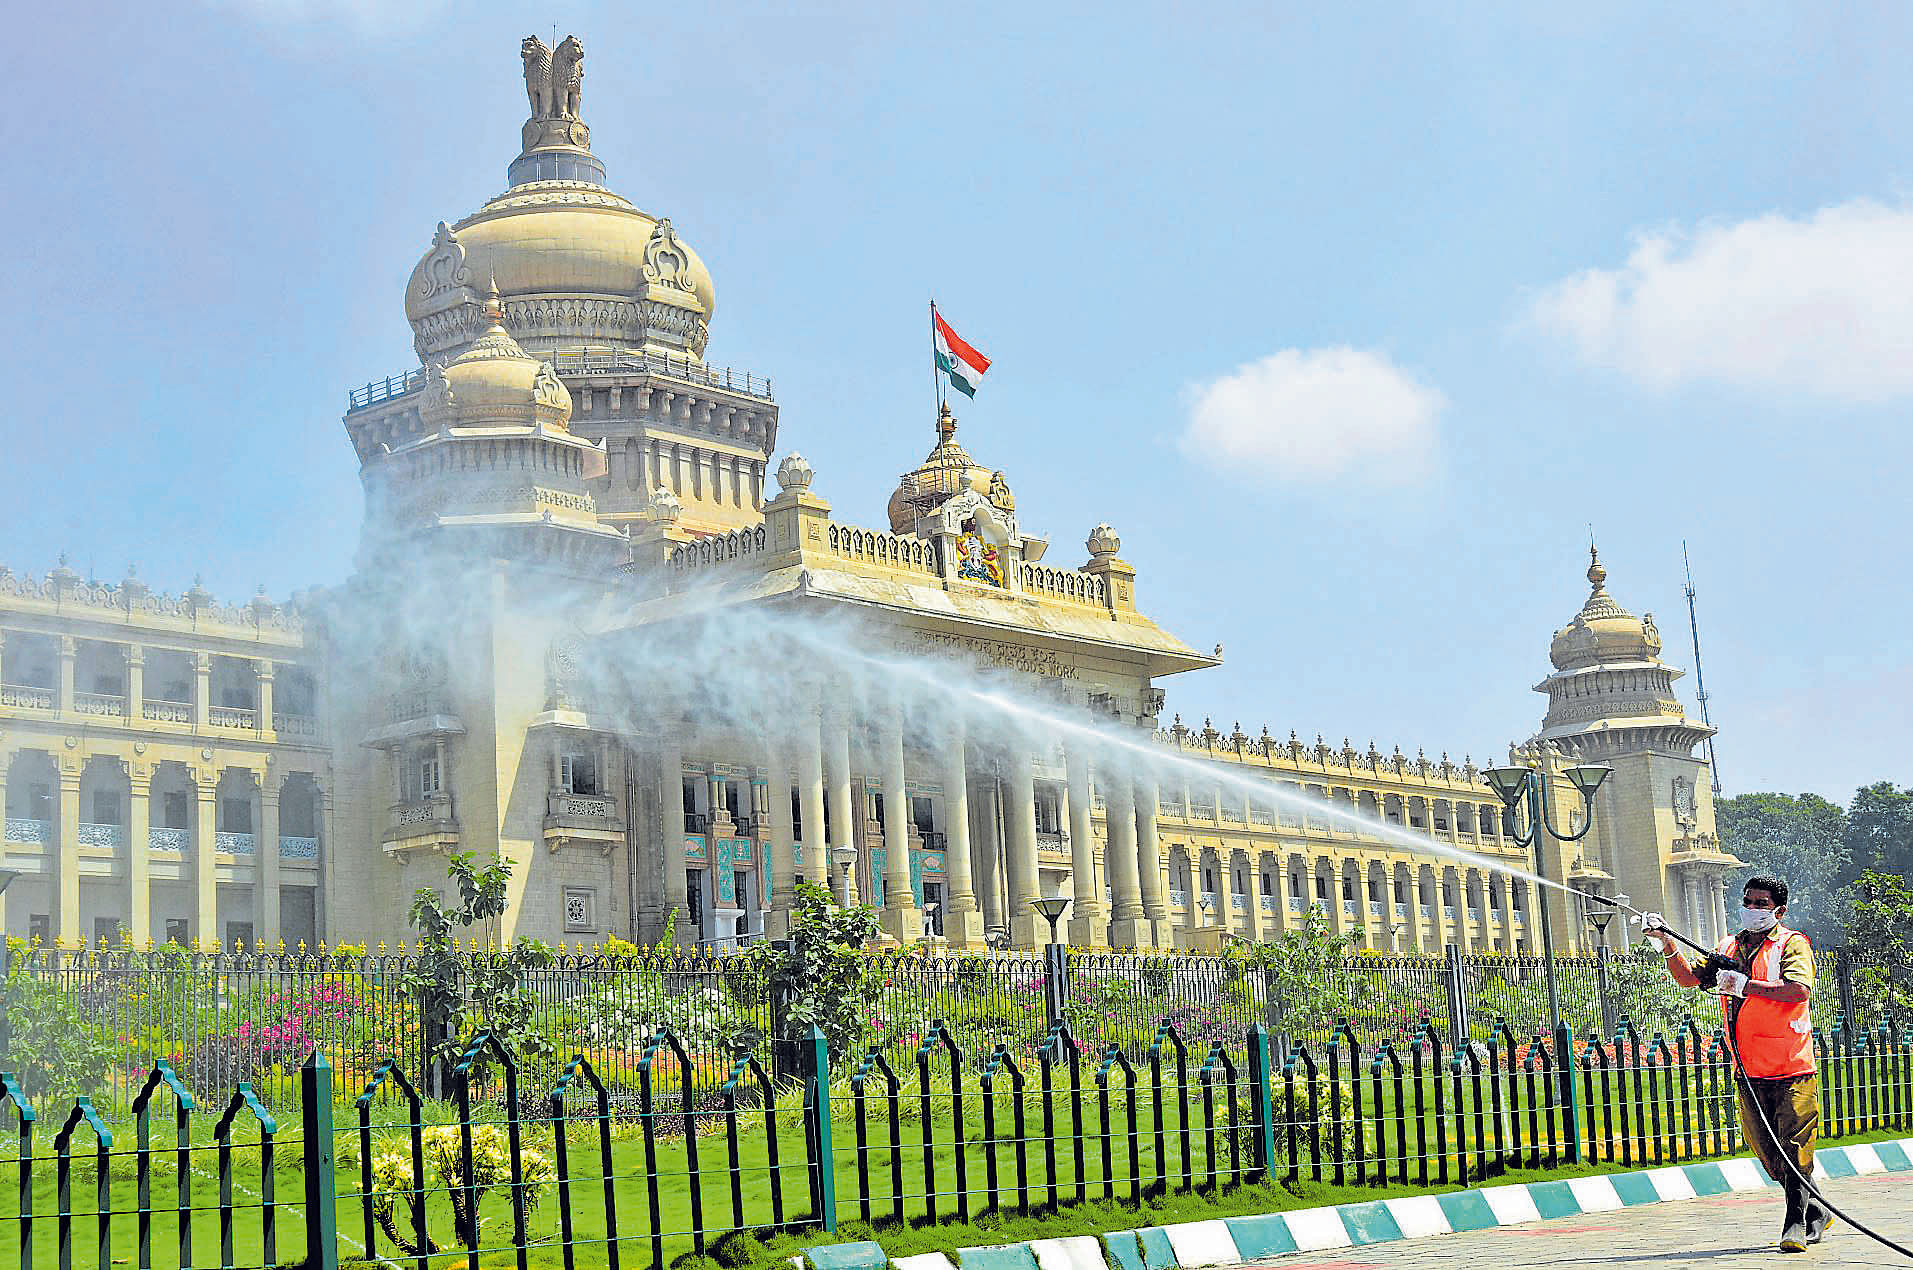 Covid-19 cases were also reported among staff at Vikasa Soudha in the past. Credit: DH Photo